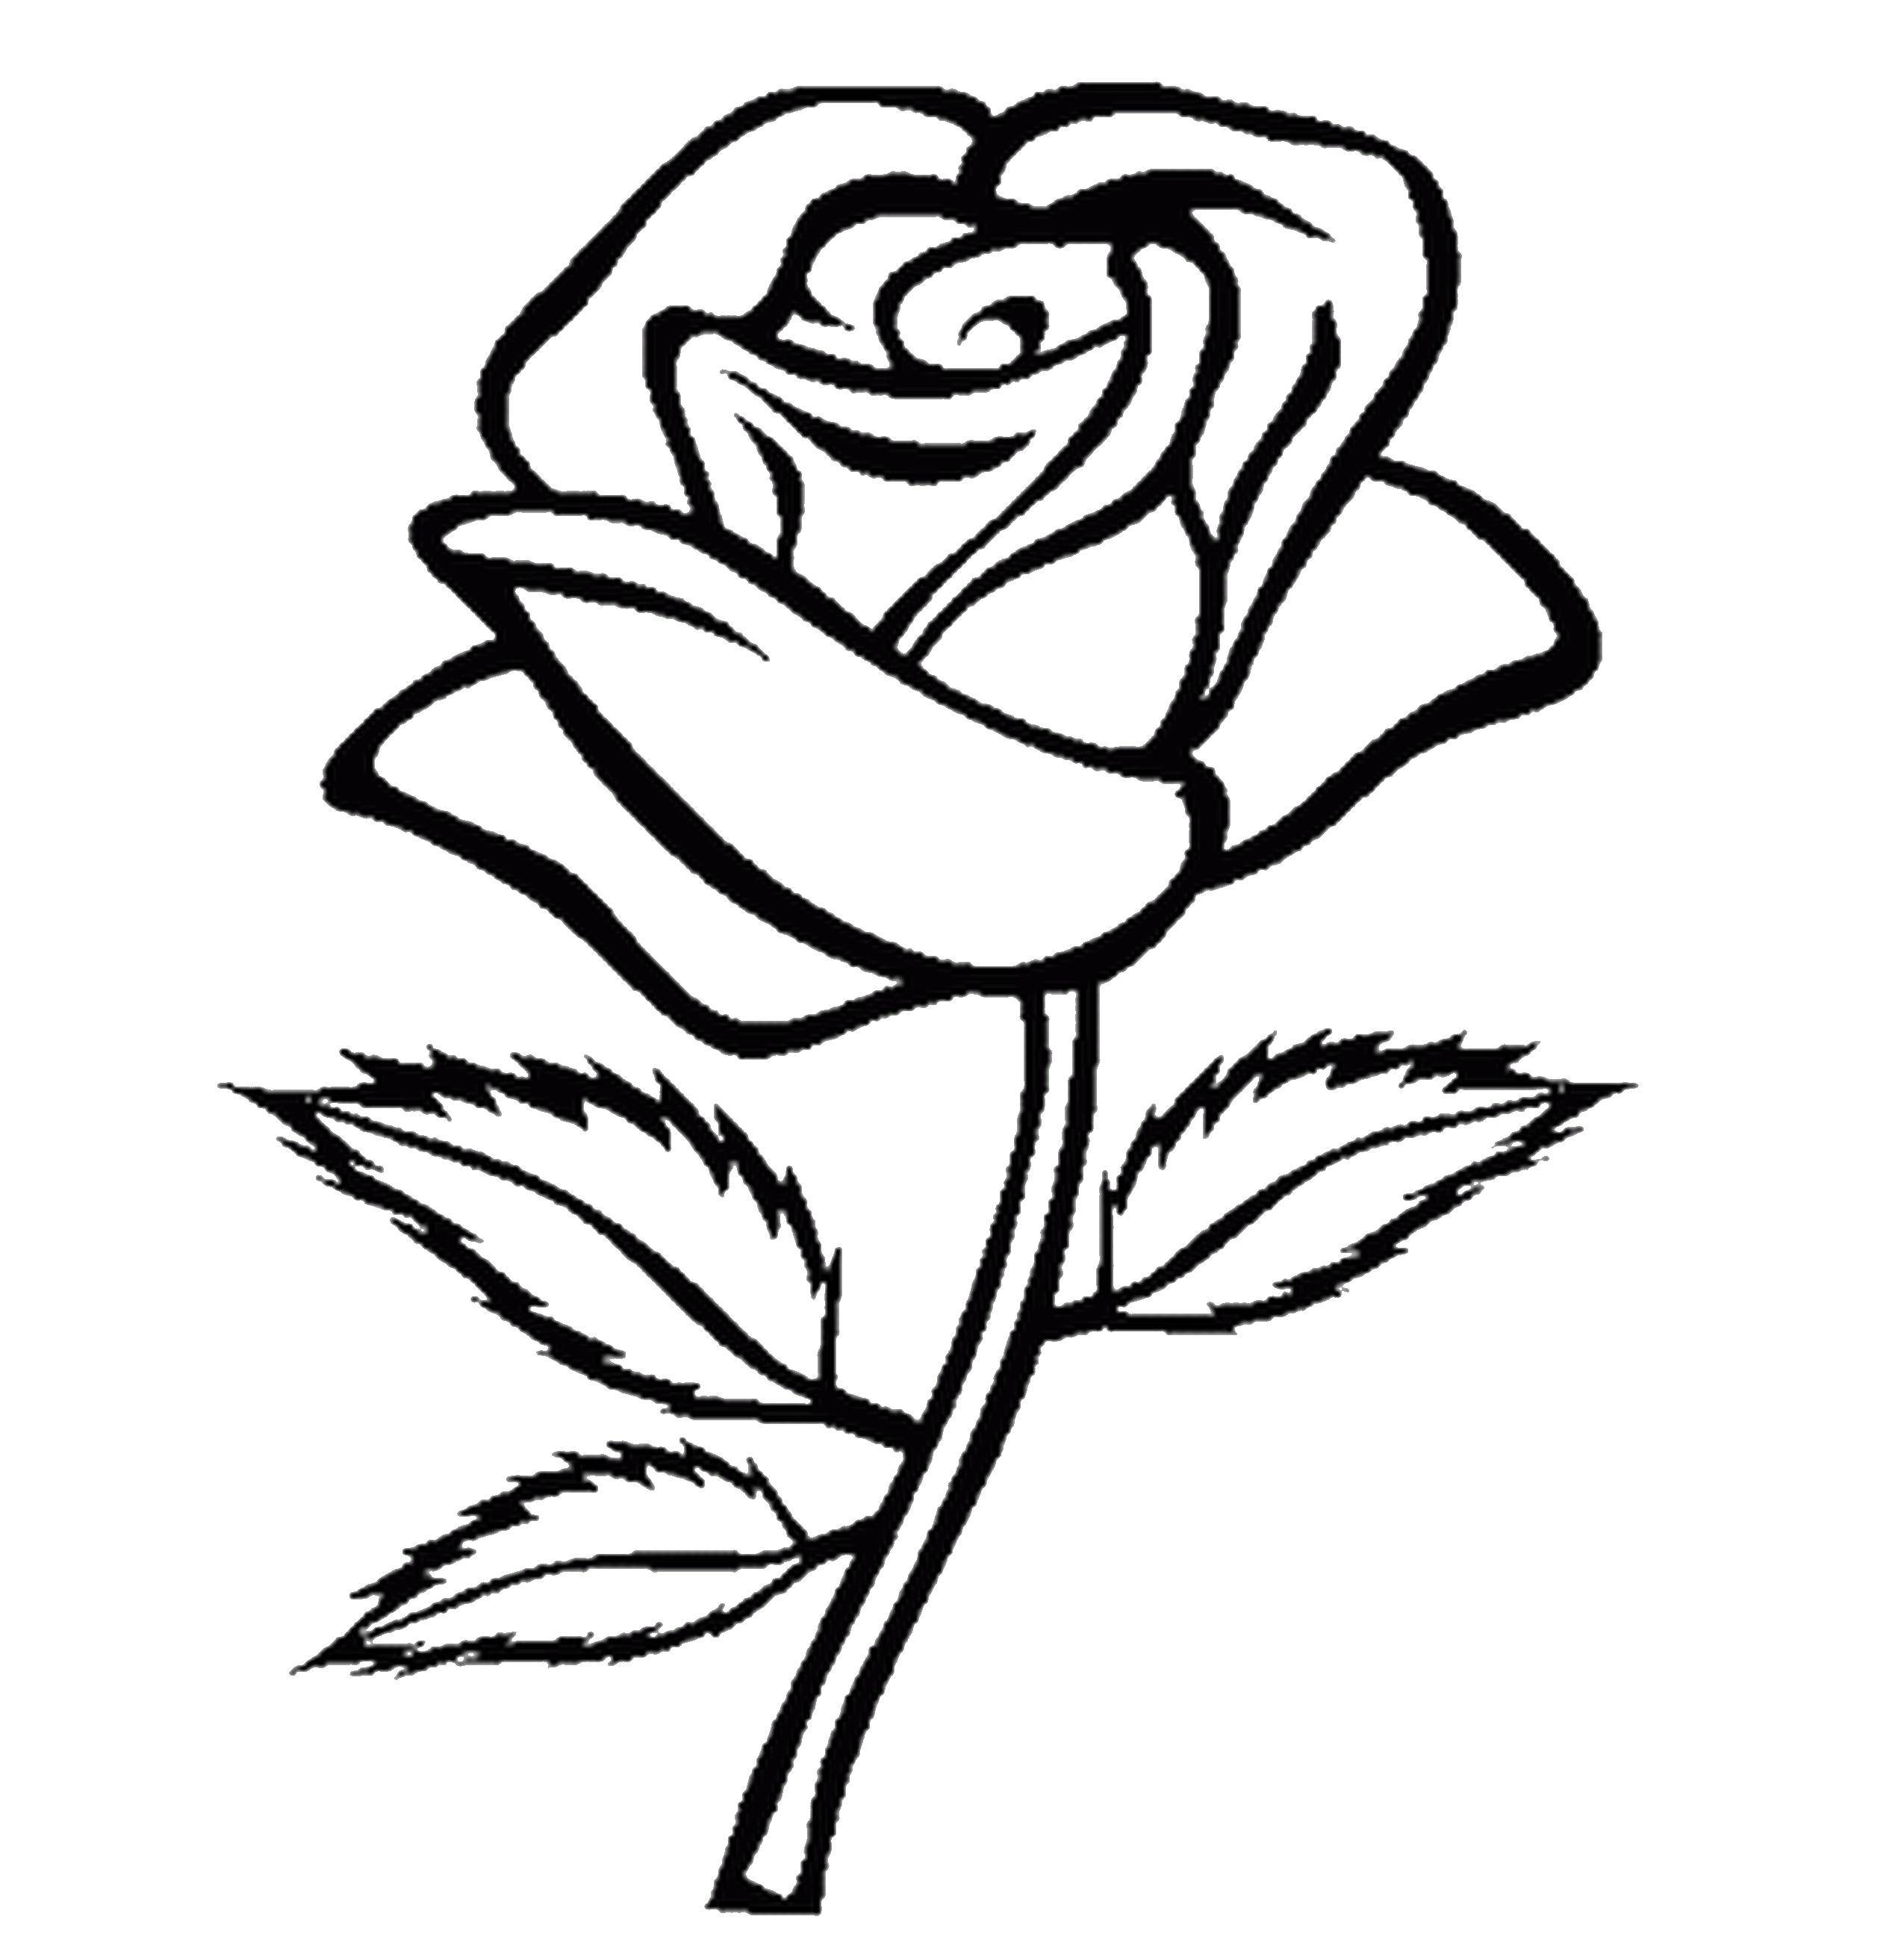 Coloring Rose without thorns. Category flowers. Tags:  flowers, roses.